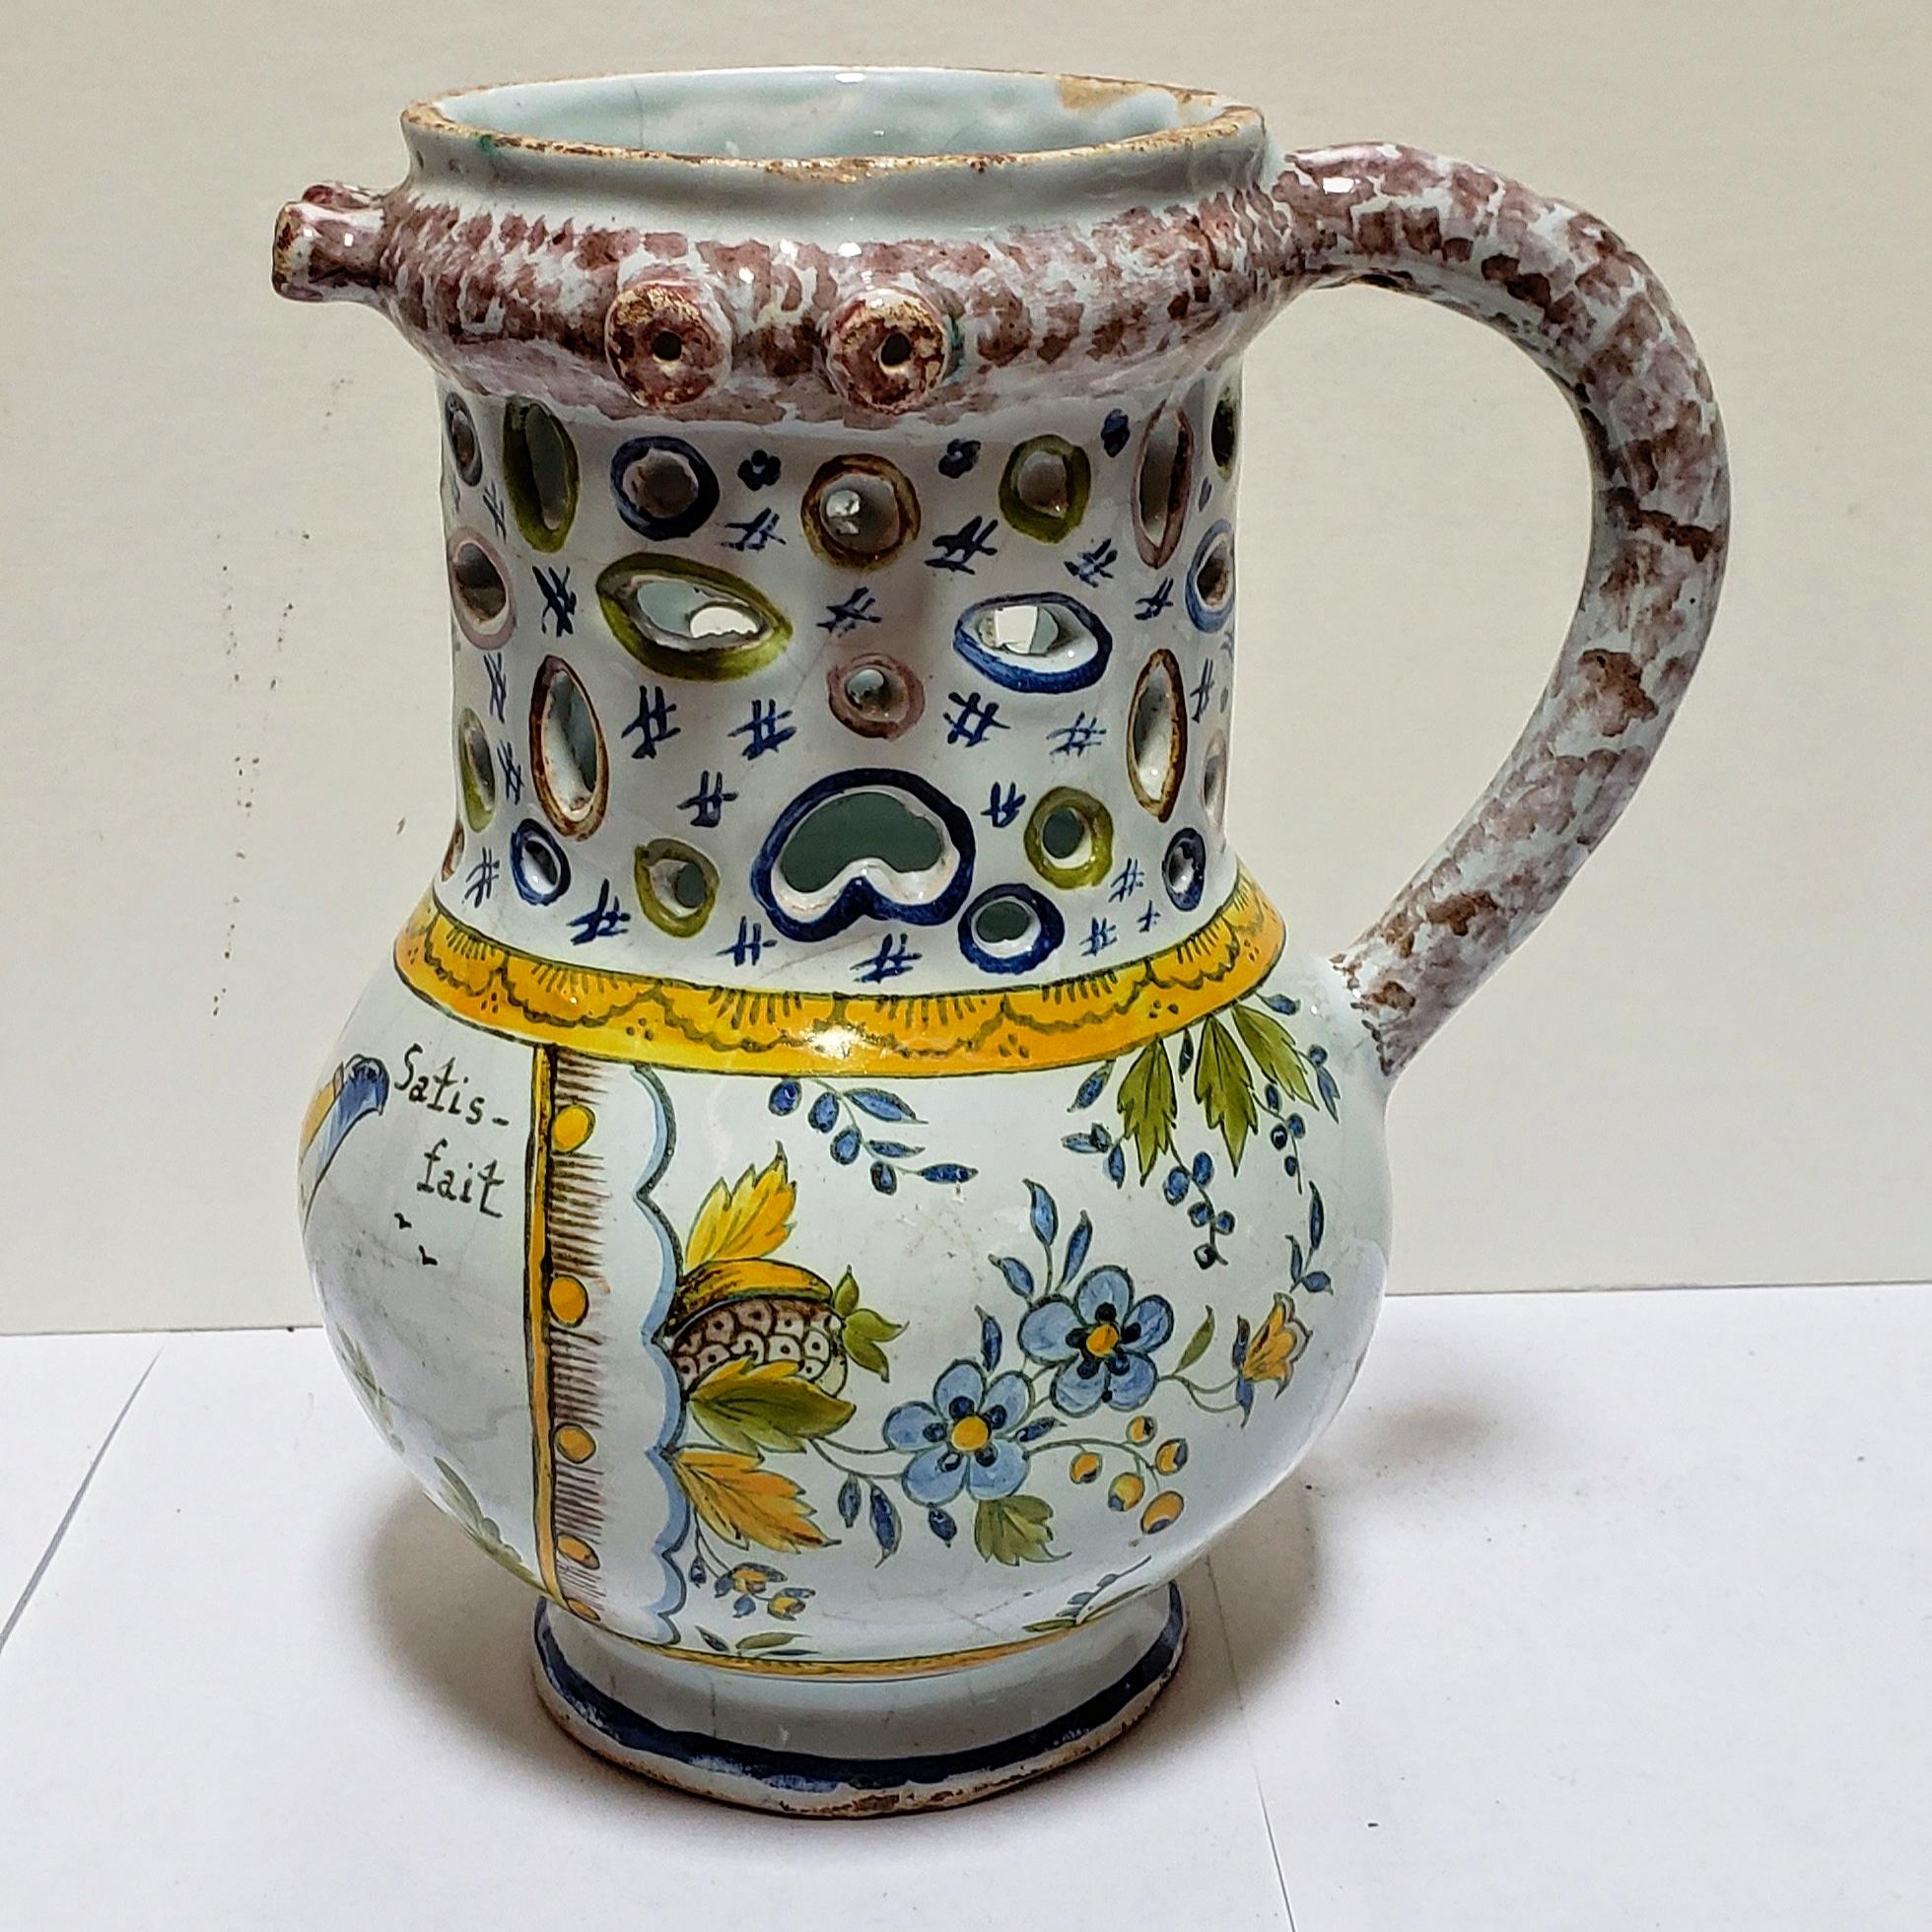 A rare and colorful French faience hand-thrown pottery “pichet trompeur” from the town of Nevers celebrating the French Revolution. The puzzle, of course, is to figure out how to drink from a pitcher with over 3 dozen holes and 6 spouts. It is very